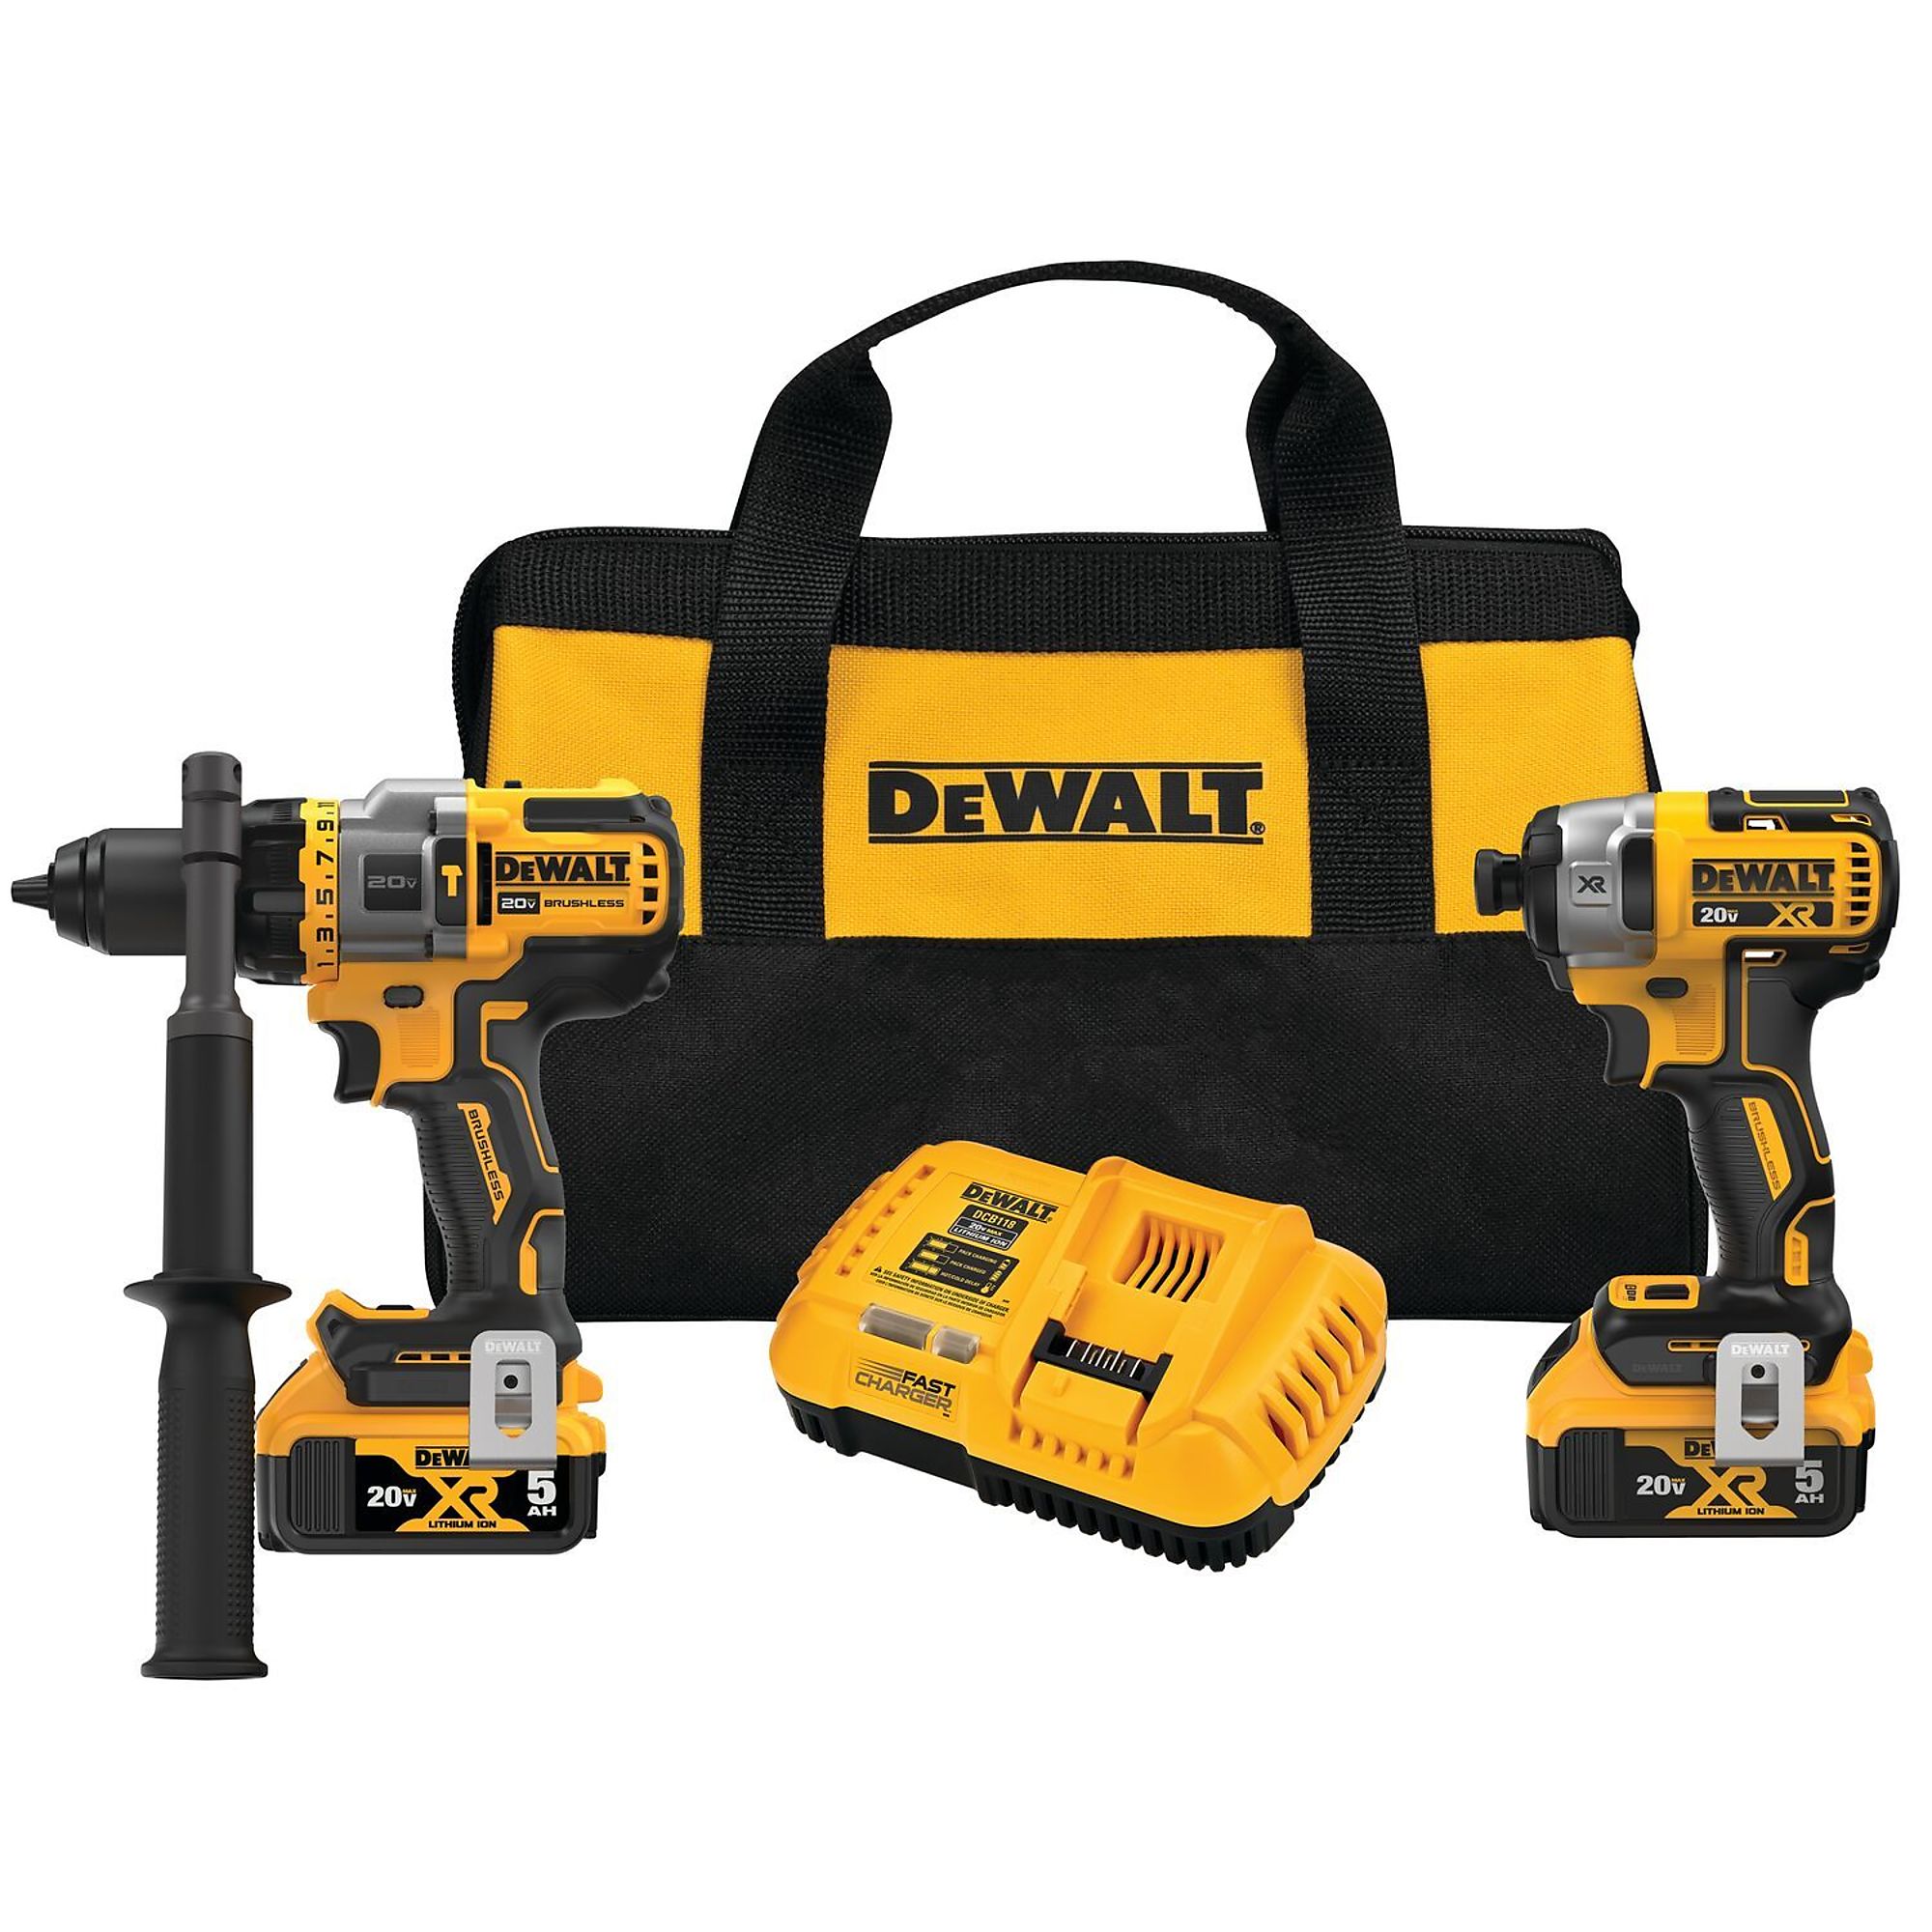 DEWALT, 20V MAX* Premium Cordless 2-Kit - Drill and Impact, Chuck Size 1/2 in, Drive Size 1/4 in, Tools Included (qty.) 2, Model DCK2100P2